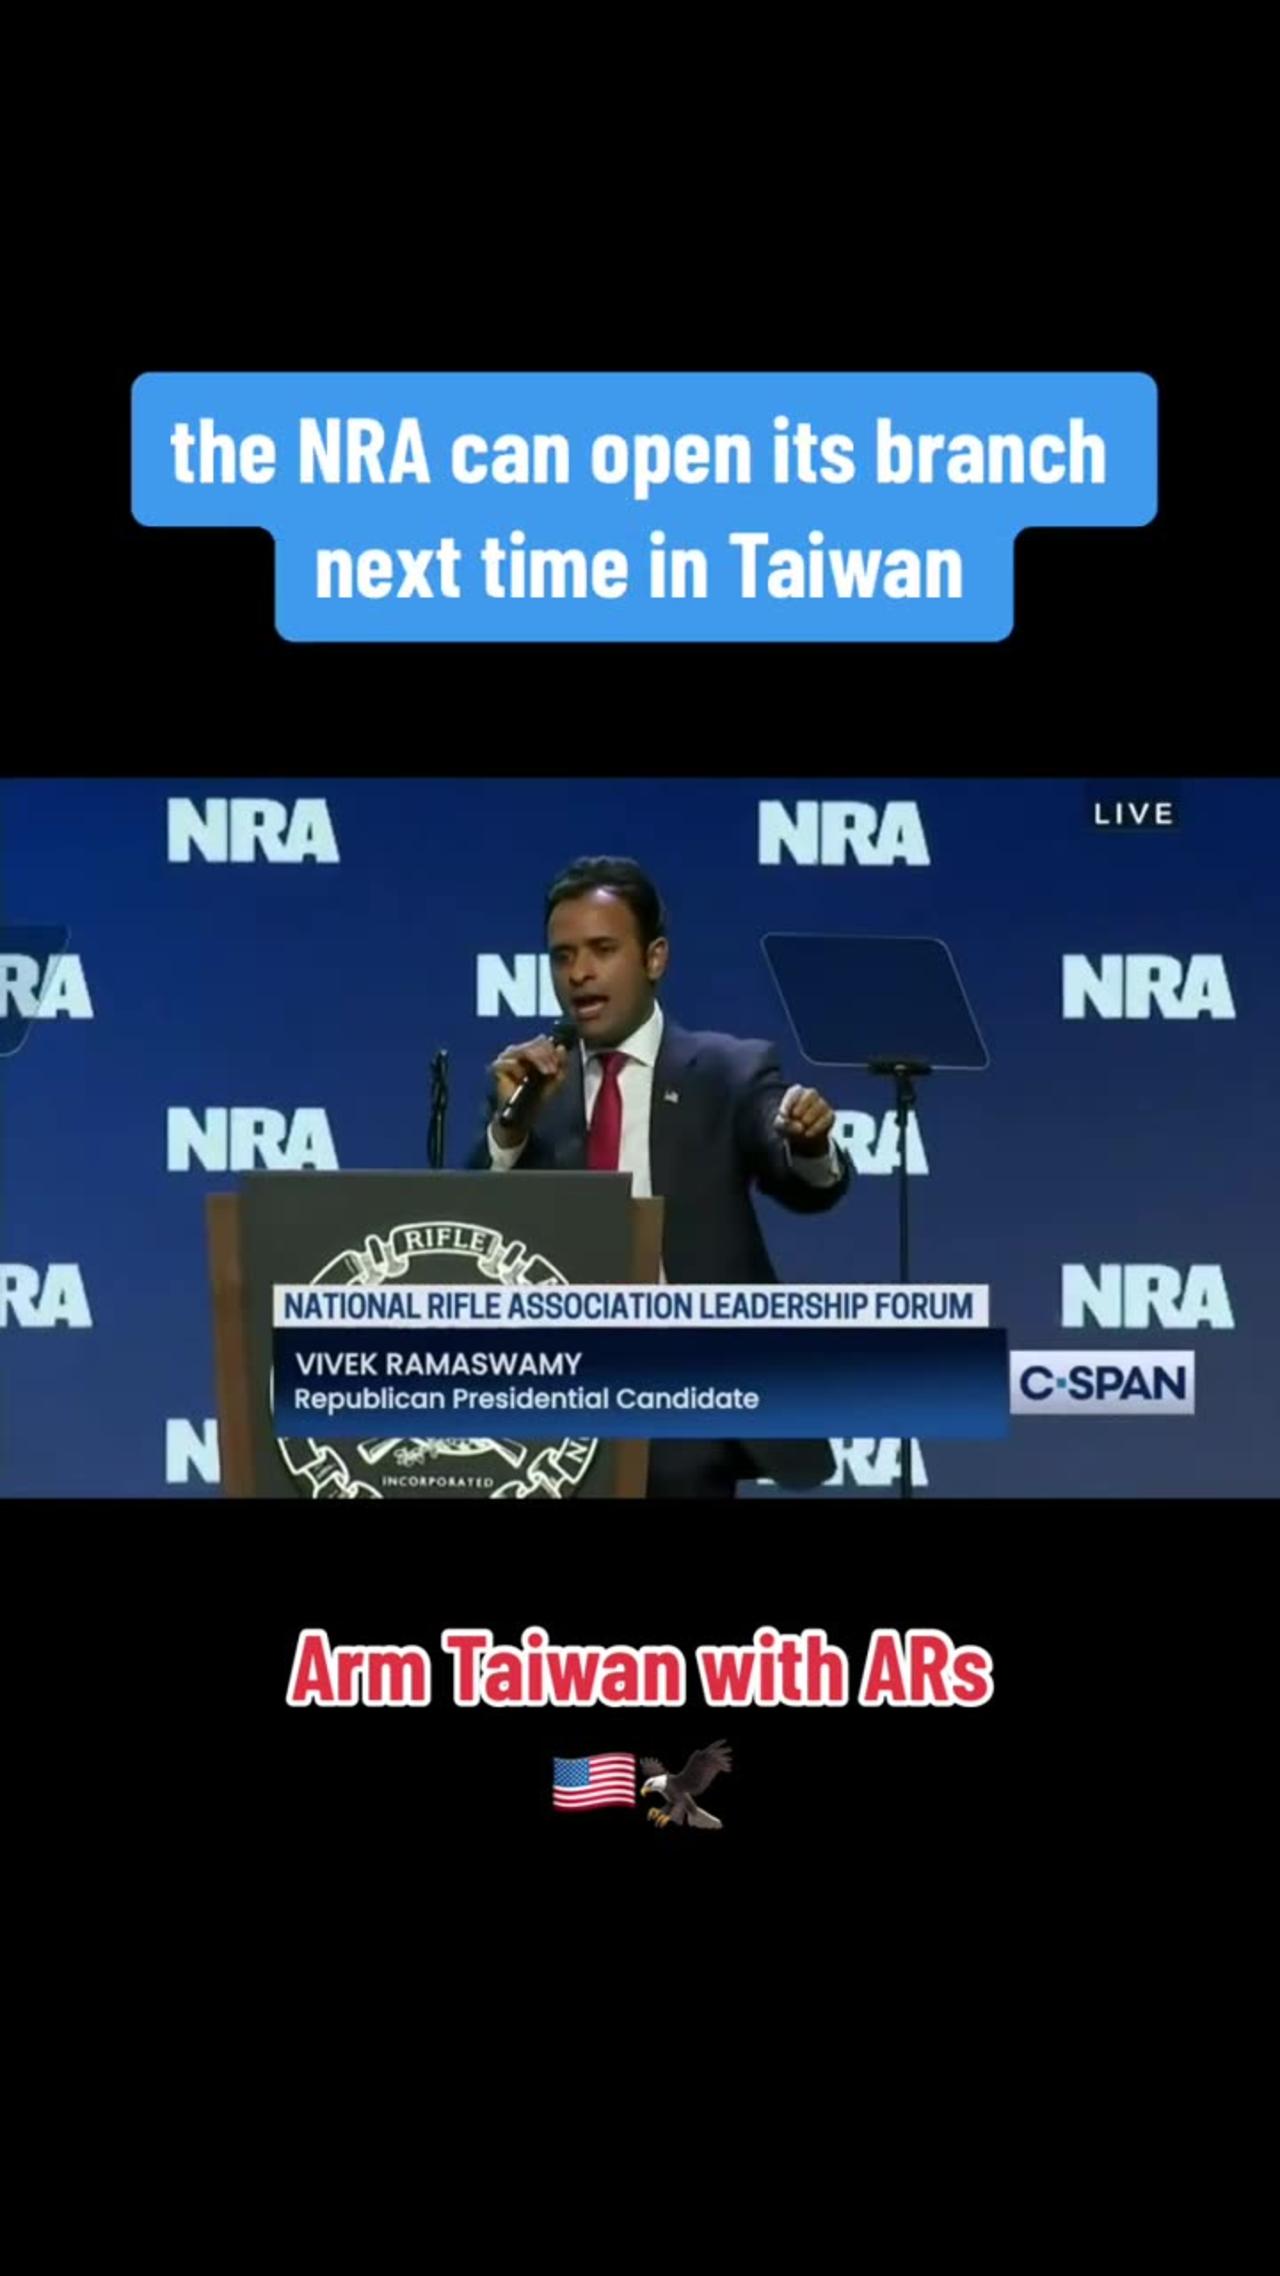 Arm Taiwan with ARs: Vivek Ramaswamy Speaking to the NRA Leadership Forum